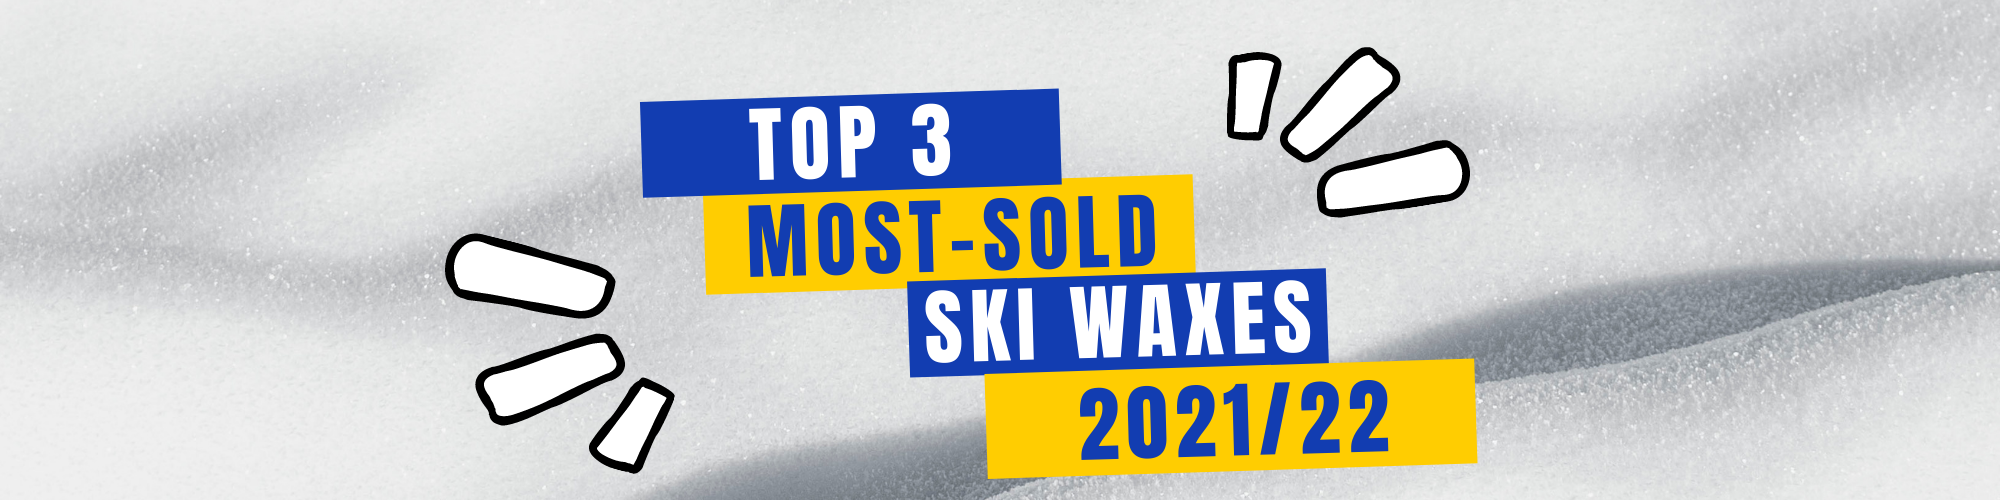 Here are Skiwax Europe TOP 3 most-sold ski waxes from 2021/22 season. -  skiwax.eu